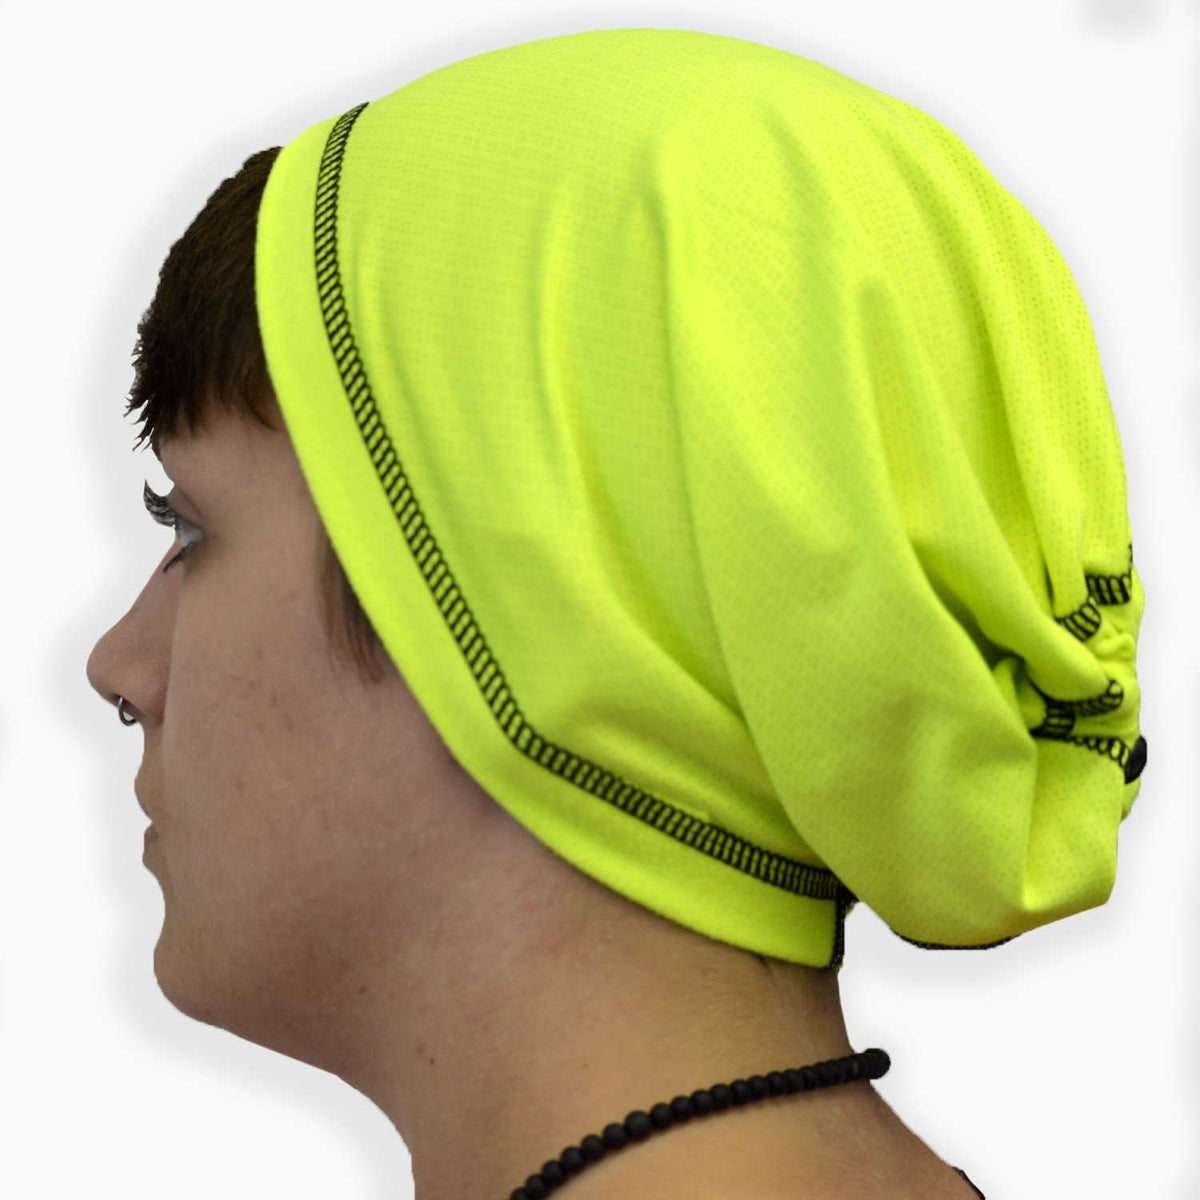 Unisex Convertible Reflective Cinch Scruff for Head and Neck in Two Colors